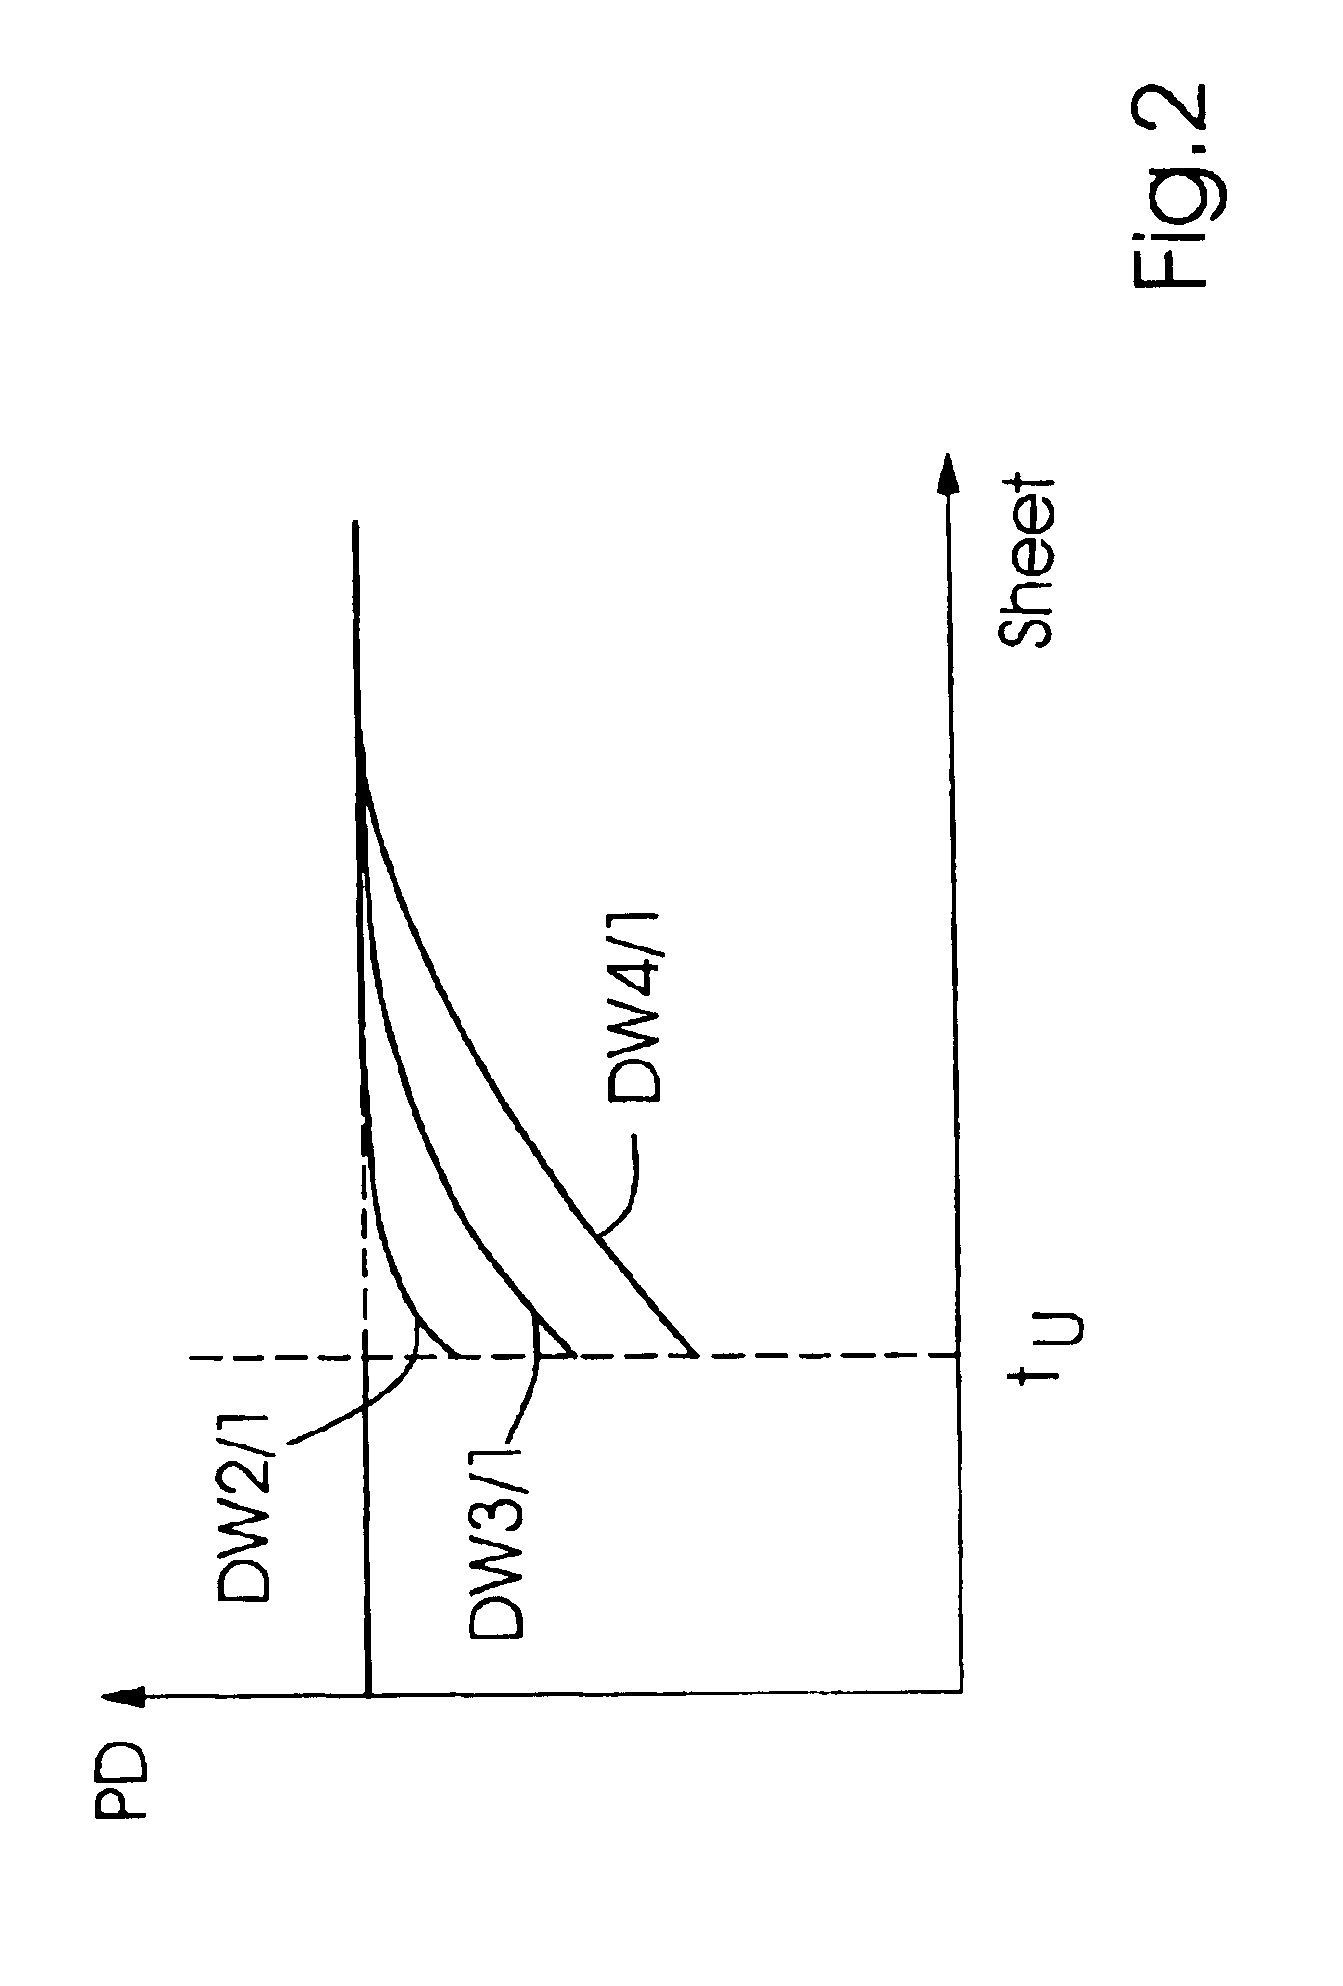 Method of compensating for misregistration during operation of a printing press